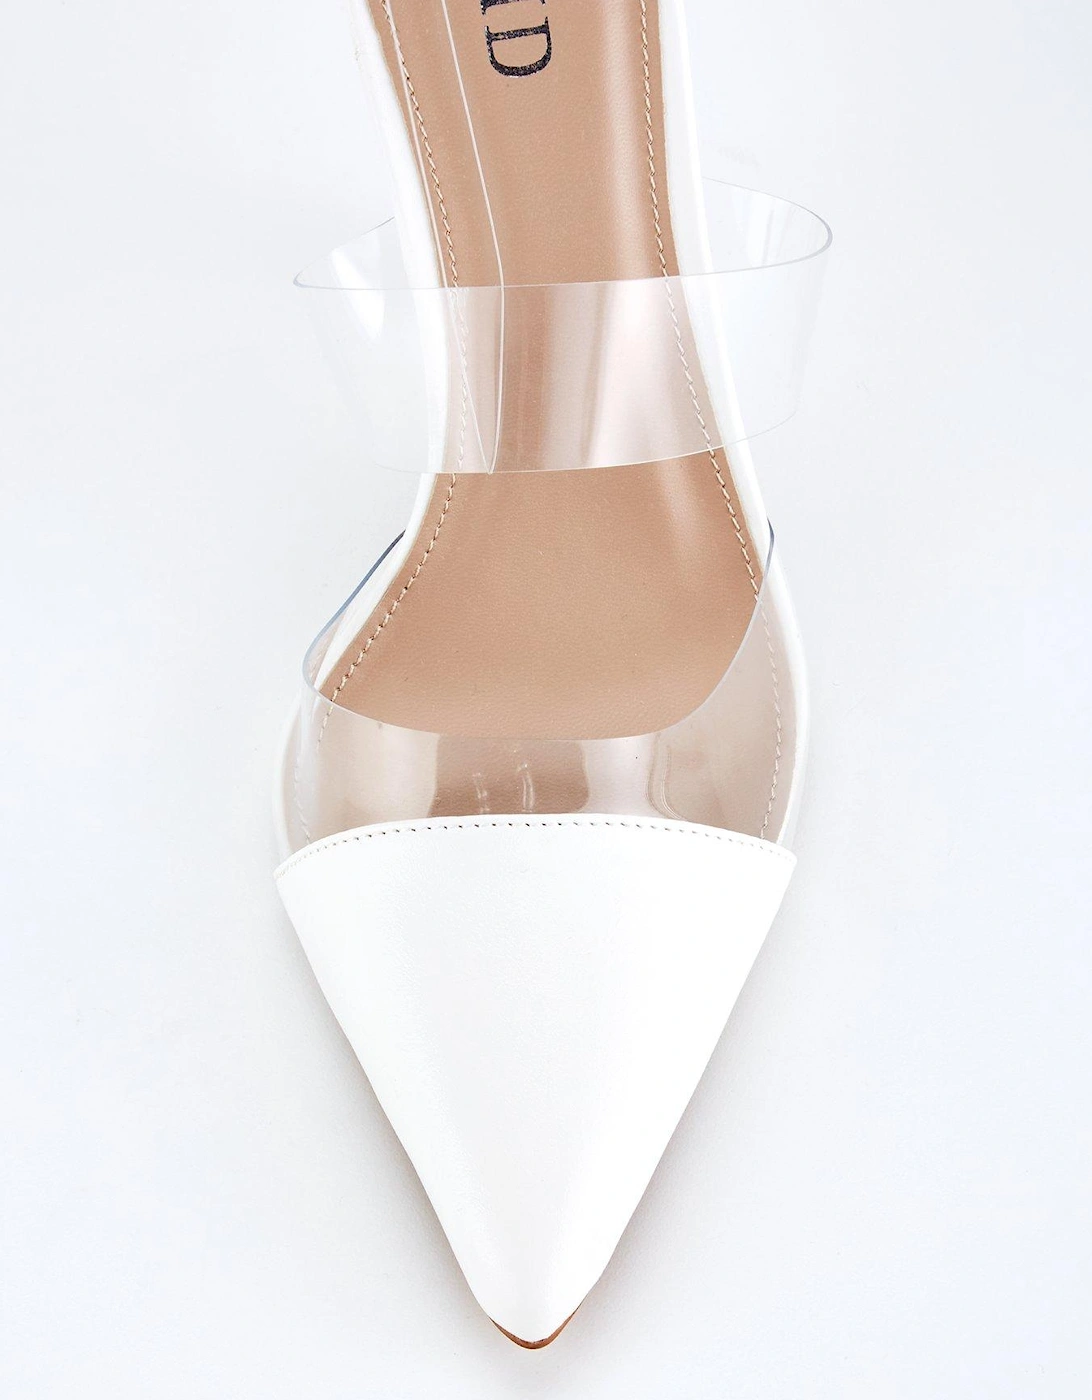 Perspex Pointed Front Heeled Sandals - White